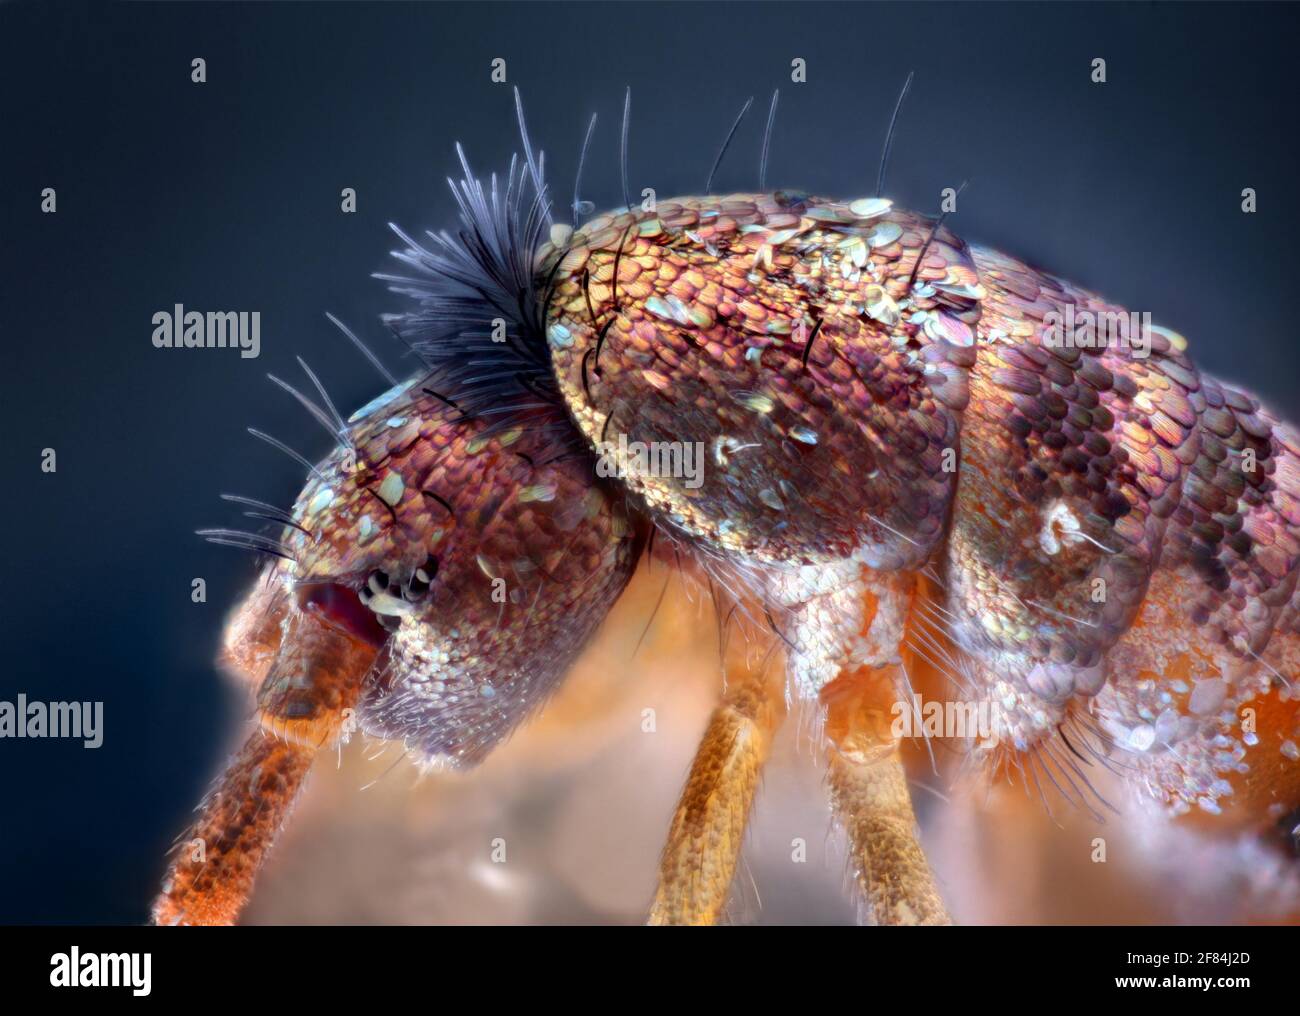 Side view of a 2 mm long Springtailes (Collembola) Stock Photo